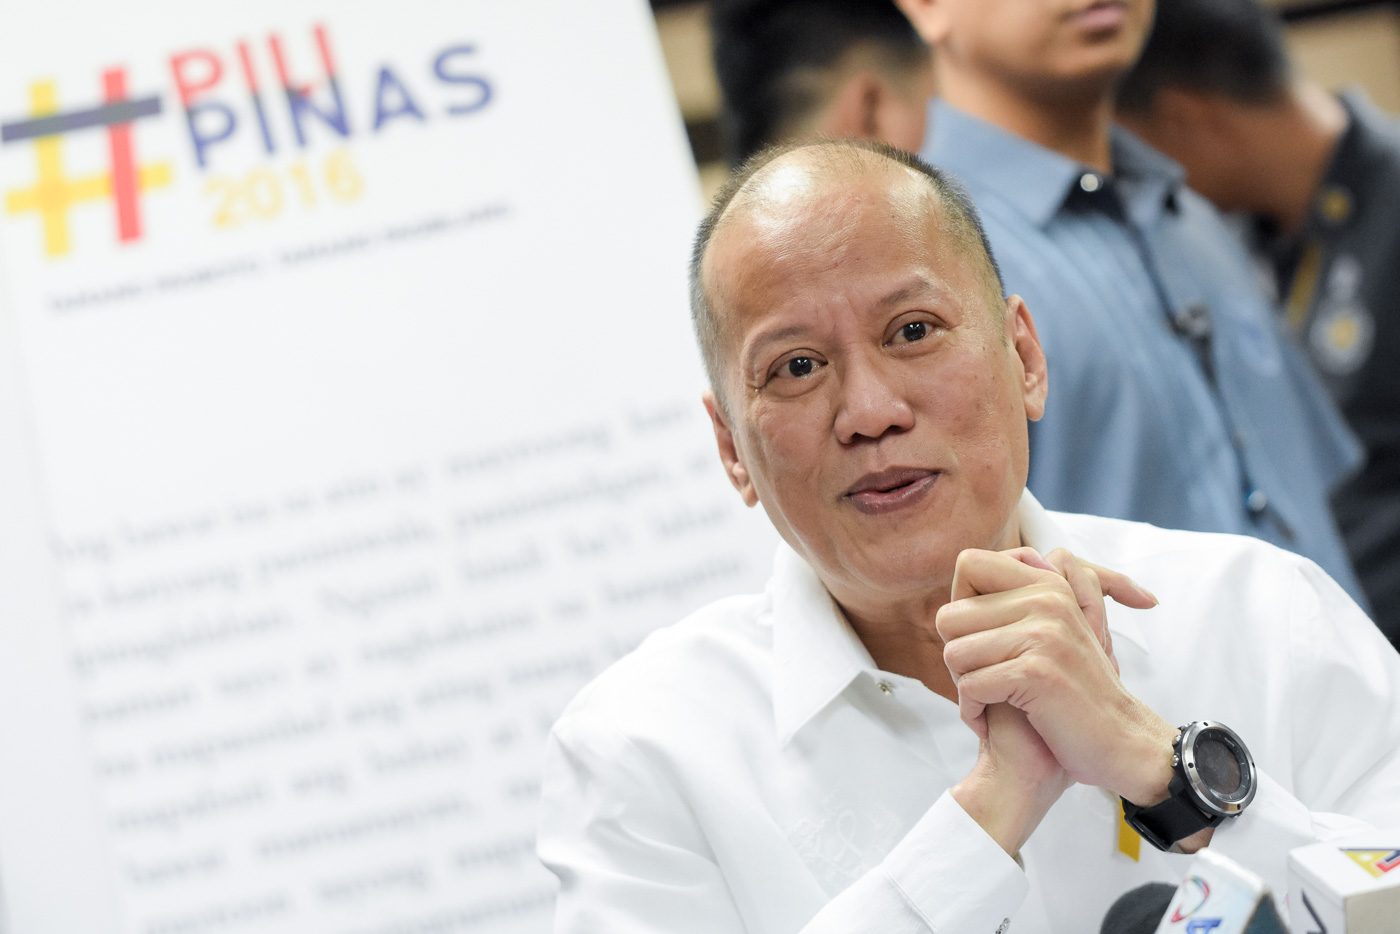 Noynoy Aquino’s memorable quotes, from defending democracy to standing up to China